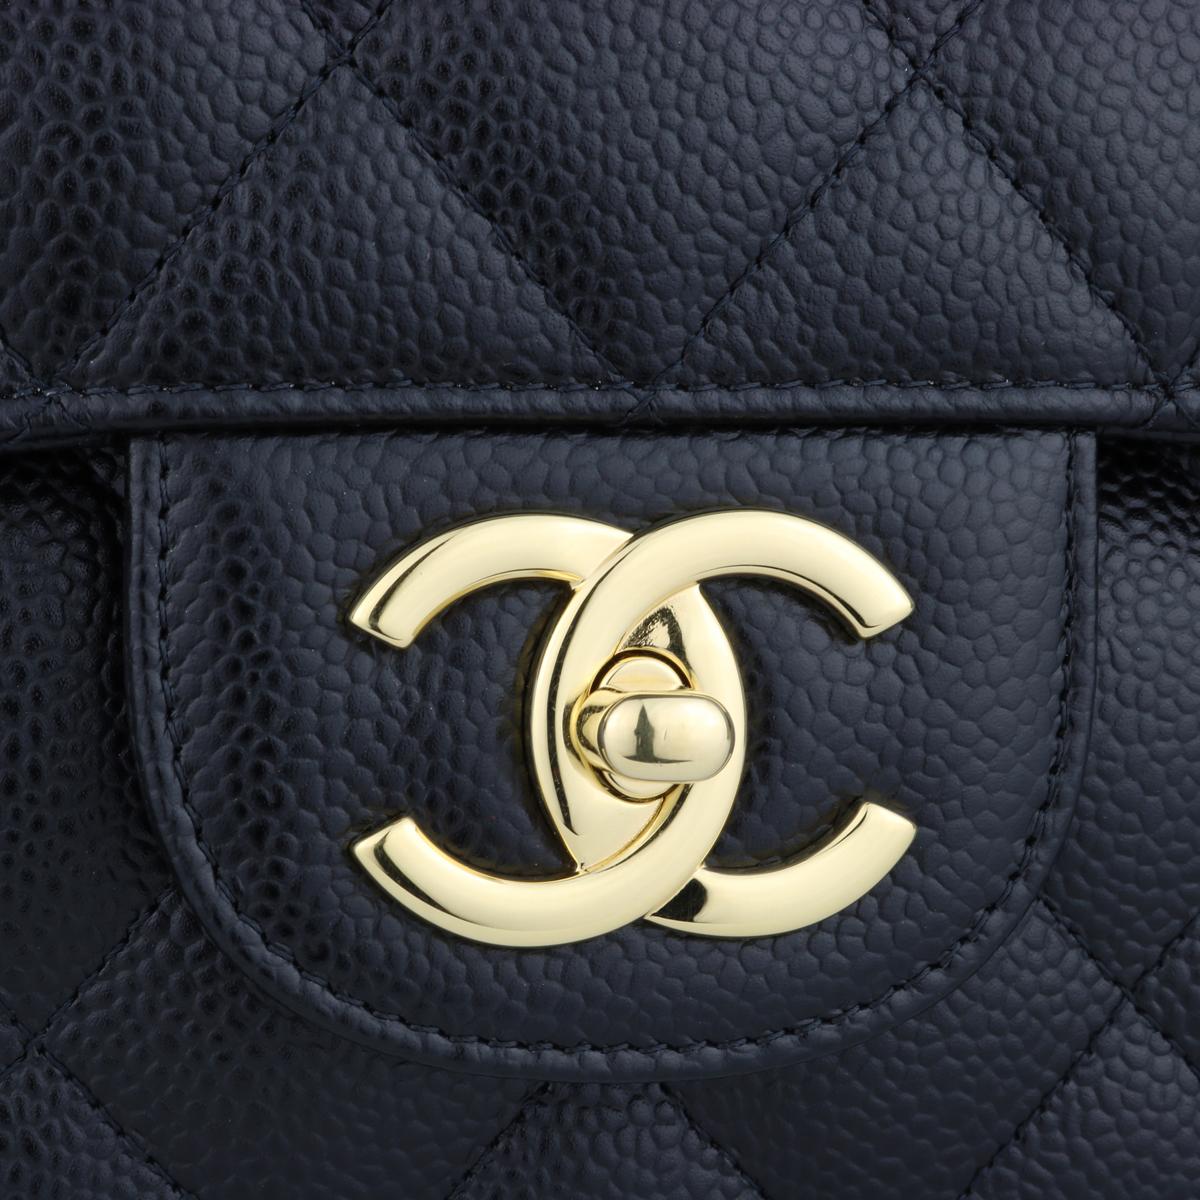 Women's or Men's CHANEL Double Flap Maxi Bag Black Caviar with Gold Hardware 2018